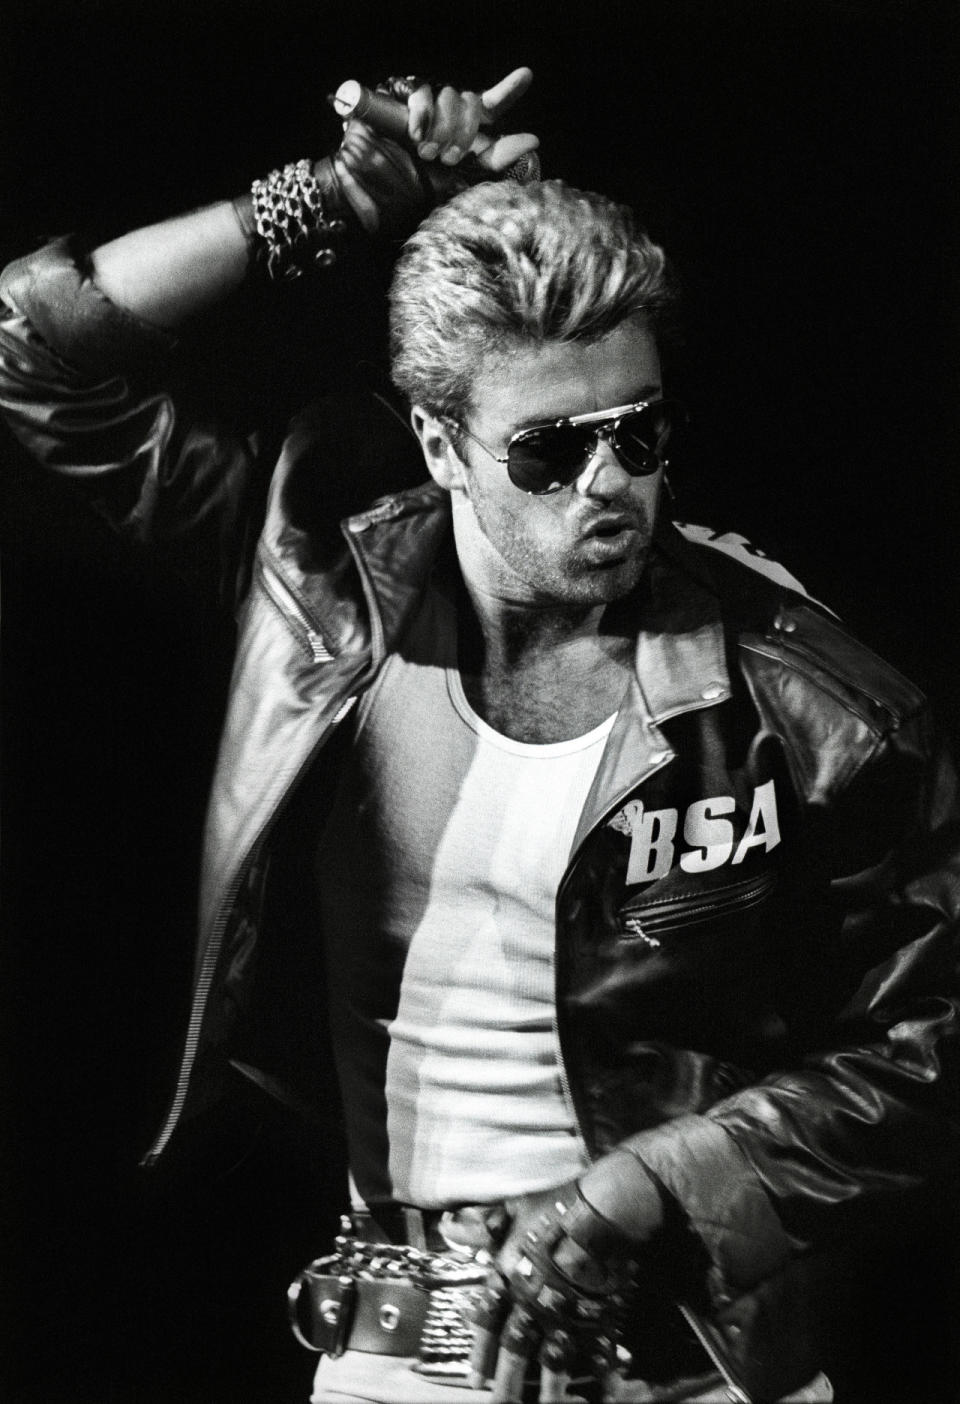 George Michael was a Grammy-winning pop icons known for his groundbreaking solo work and for fronting Wham! in the 1980s. He died on Christmas Day at age 53. (Photo: Redferns)